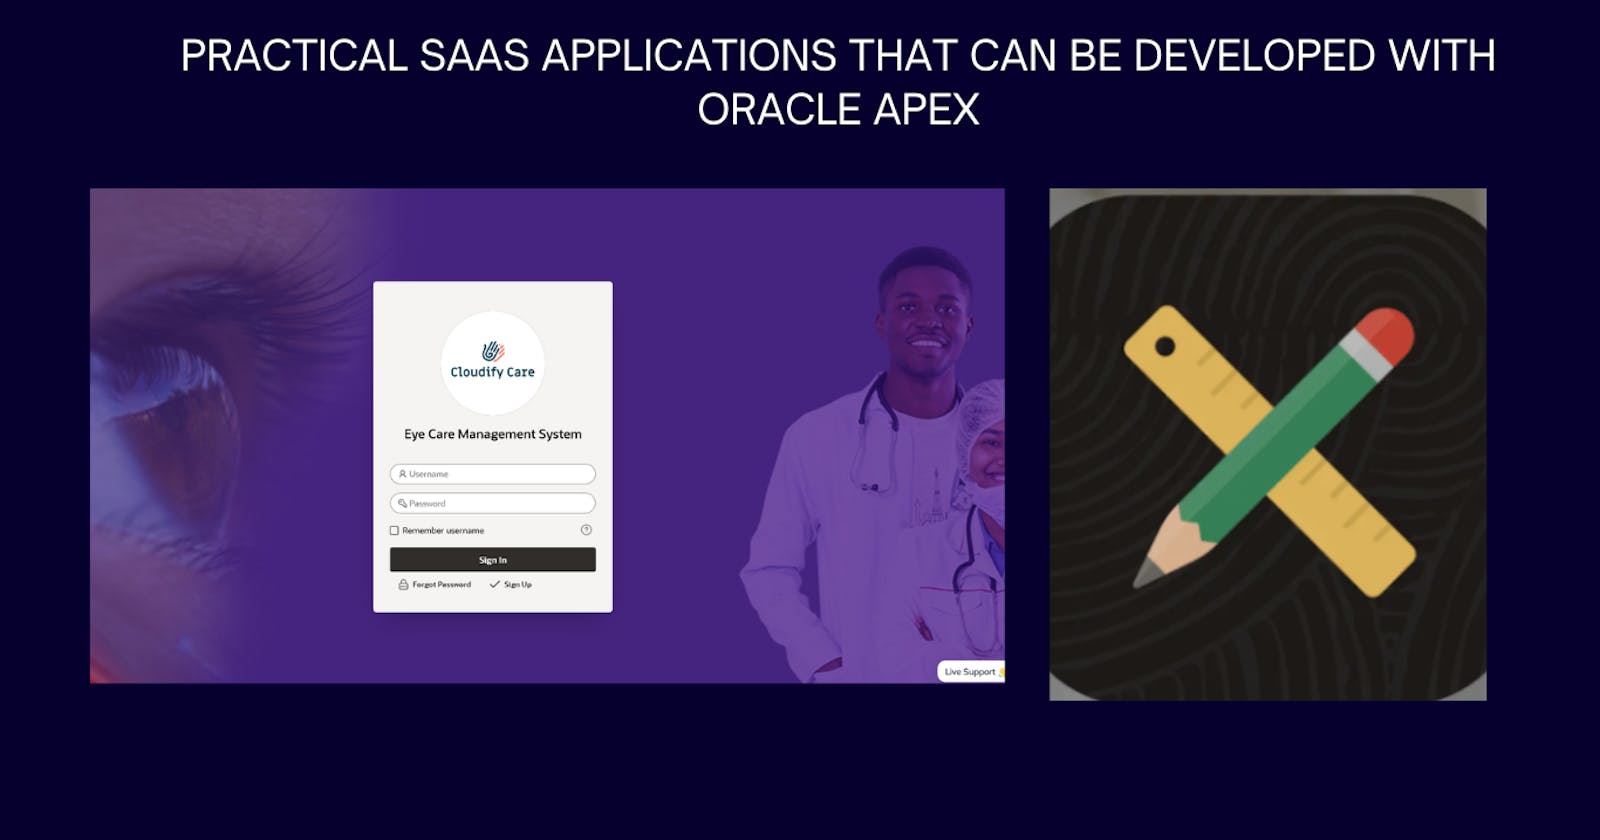 Practical SaaS Application that can be developed with Oracle APEX.